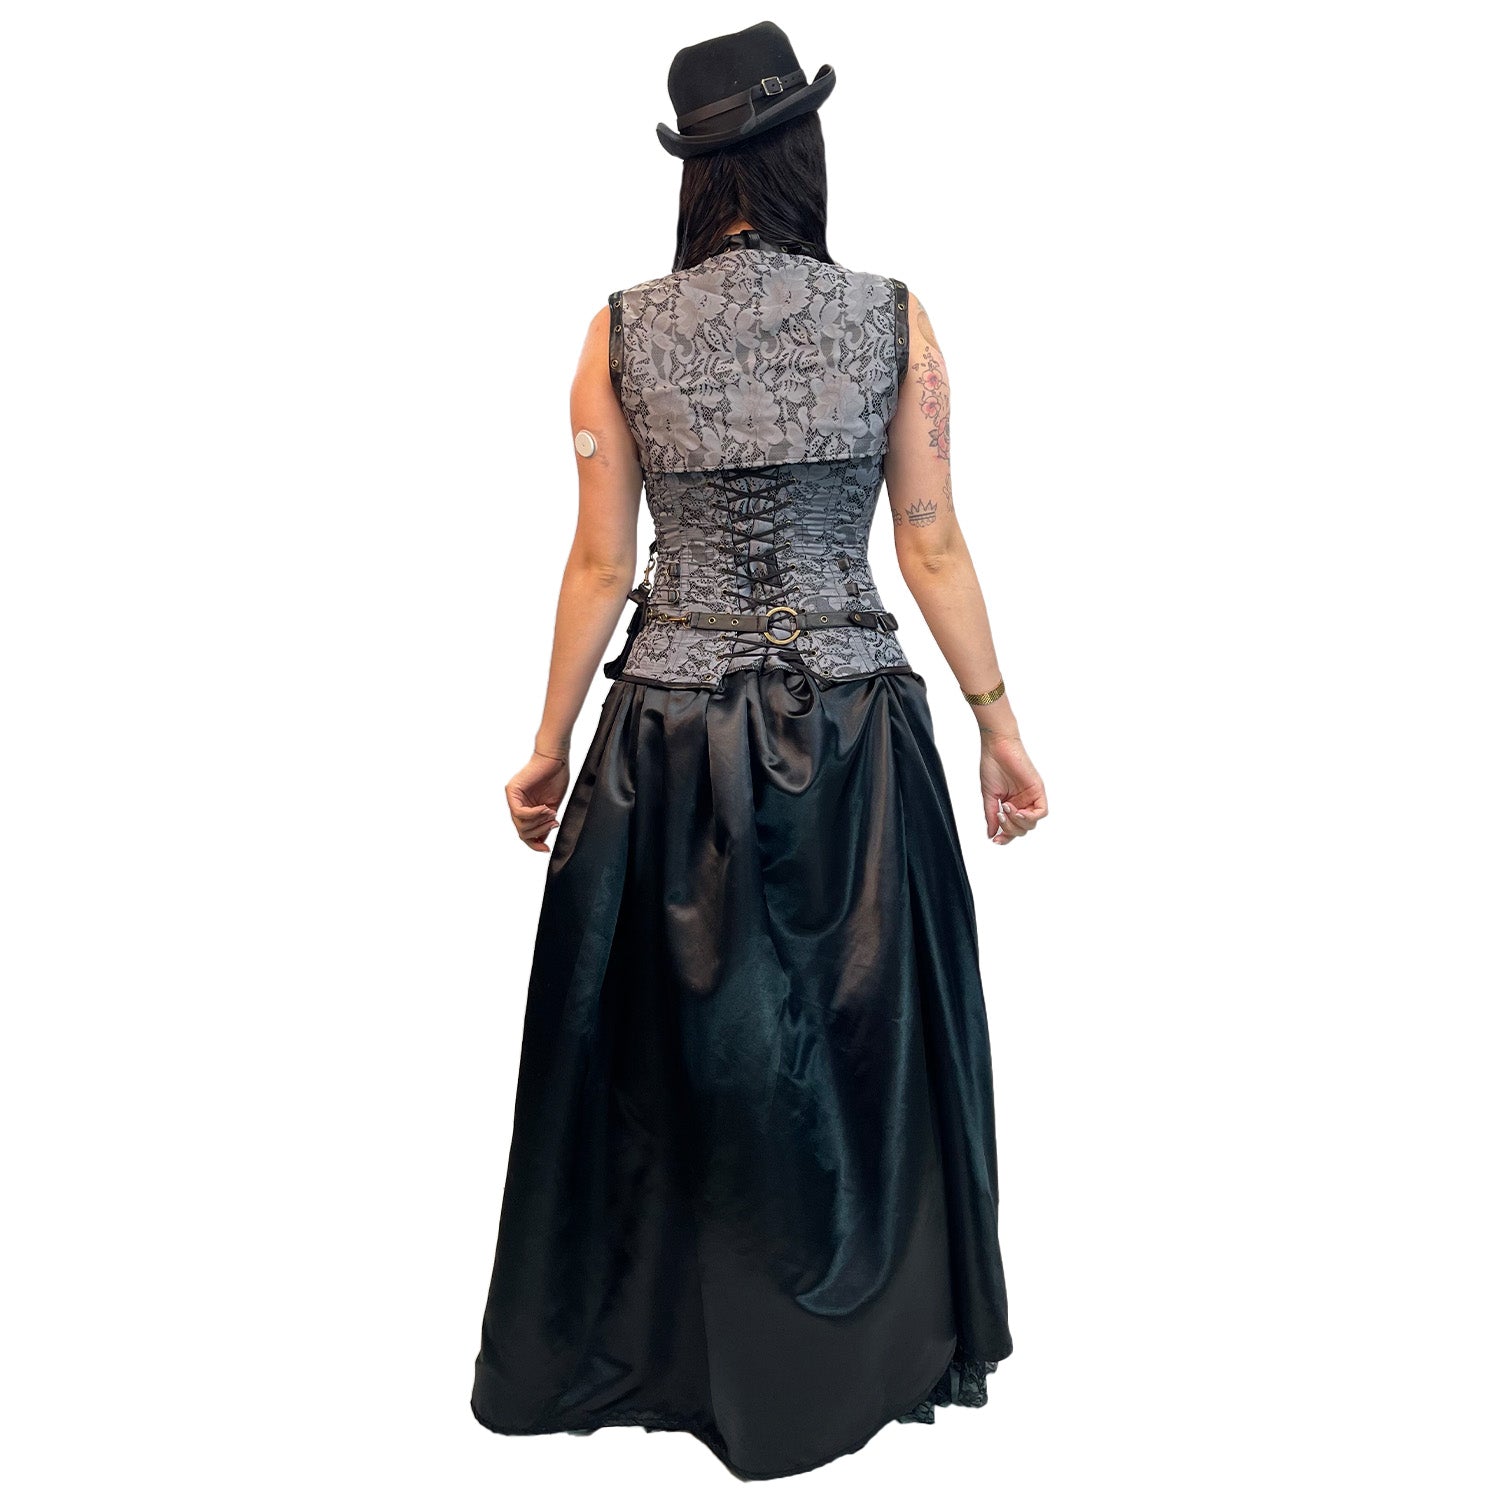 Steampunk, Women's Black  w/ Grey Floral Lace Detail Adult Costume